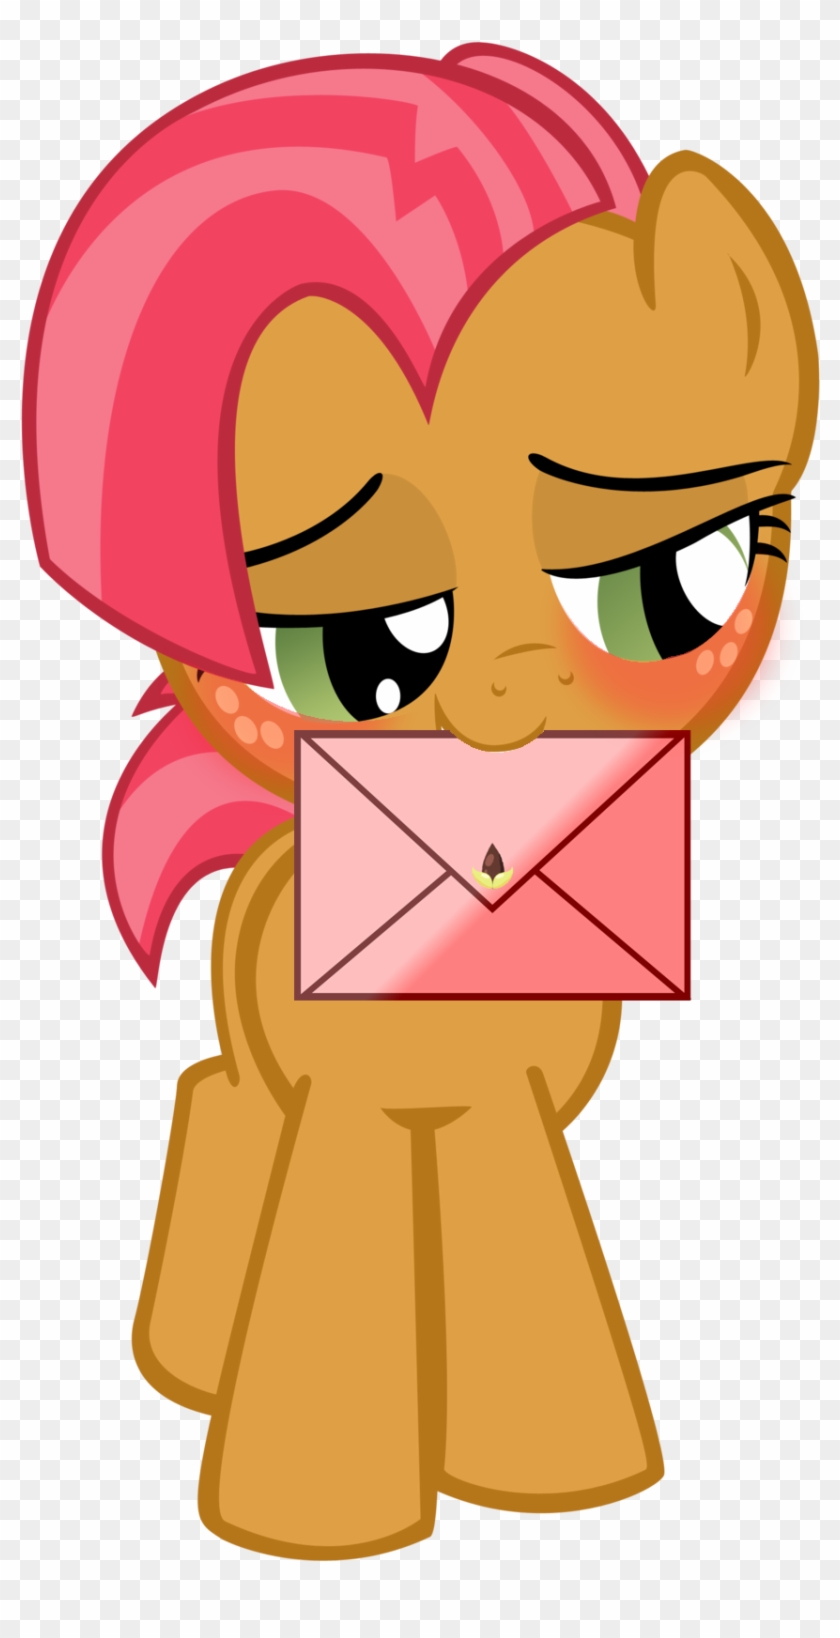 Purezparity, Babs Seed, Blushing, Crush, Earth Pony, - Apple Bloom And Babs Seed Kiss #1416492